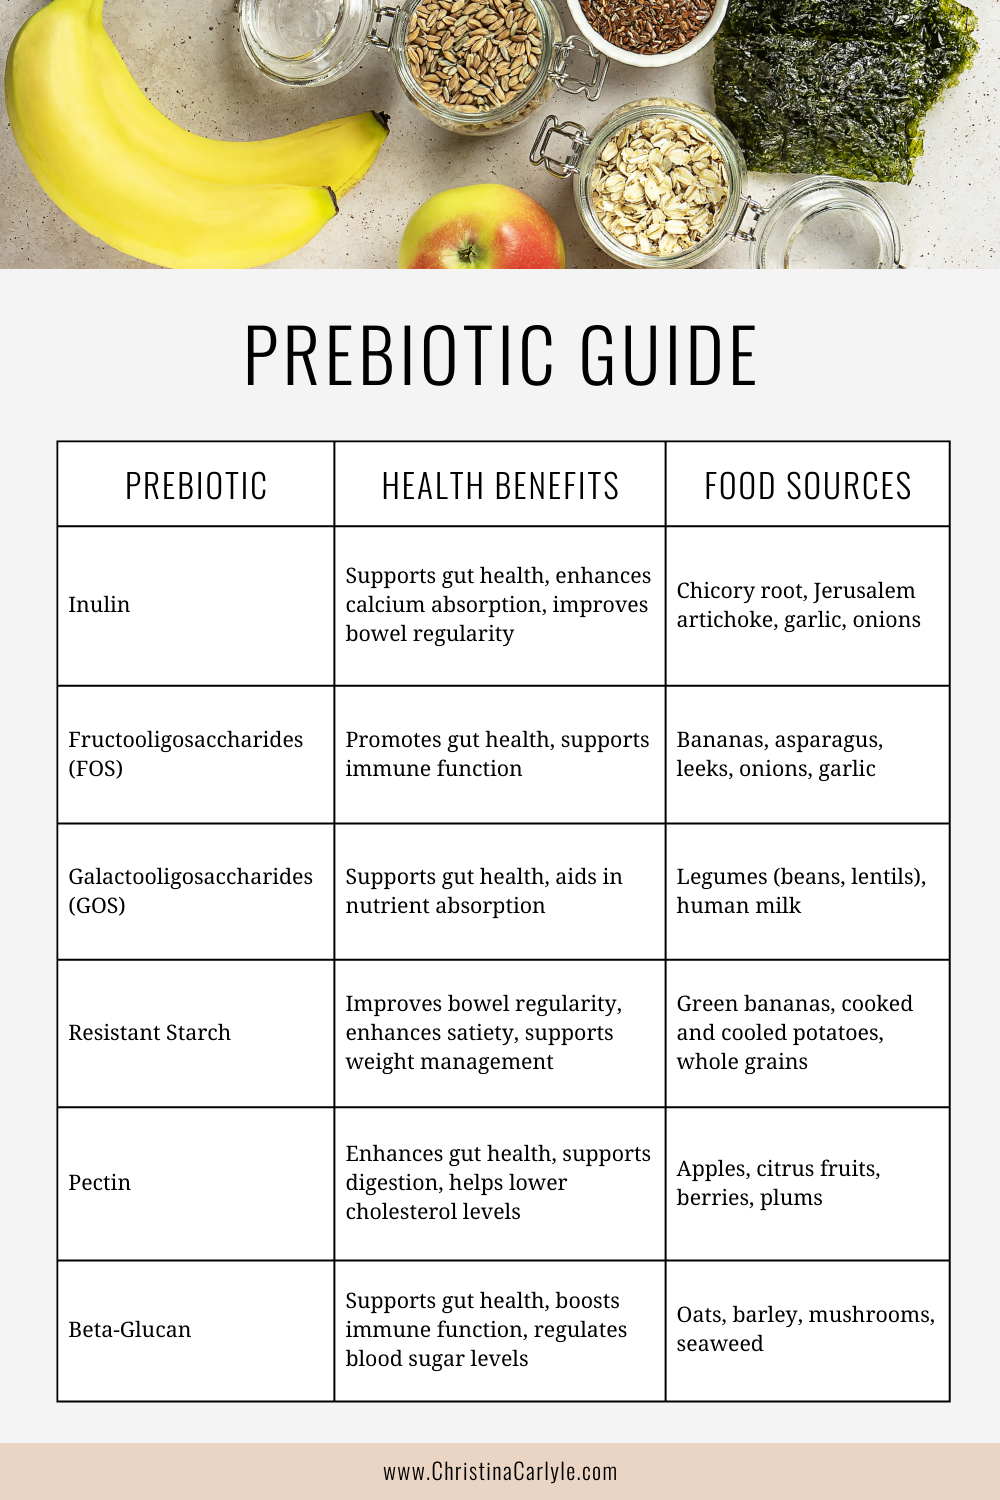 A Prebiotic Guide with a chart of the different prebiotic fibers, their health benefits, and food sources